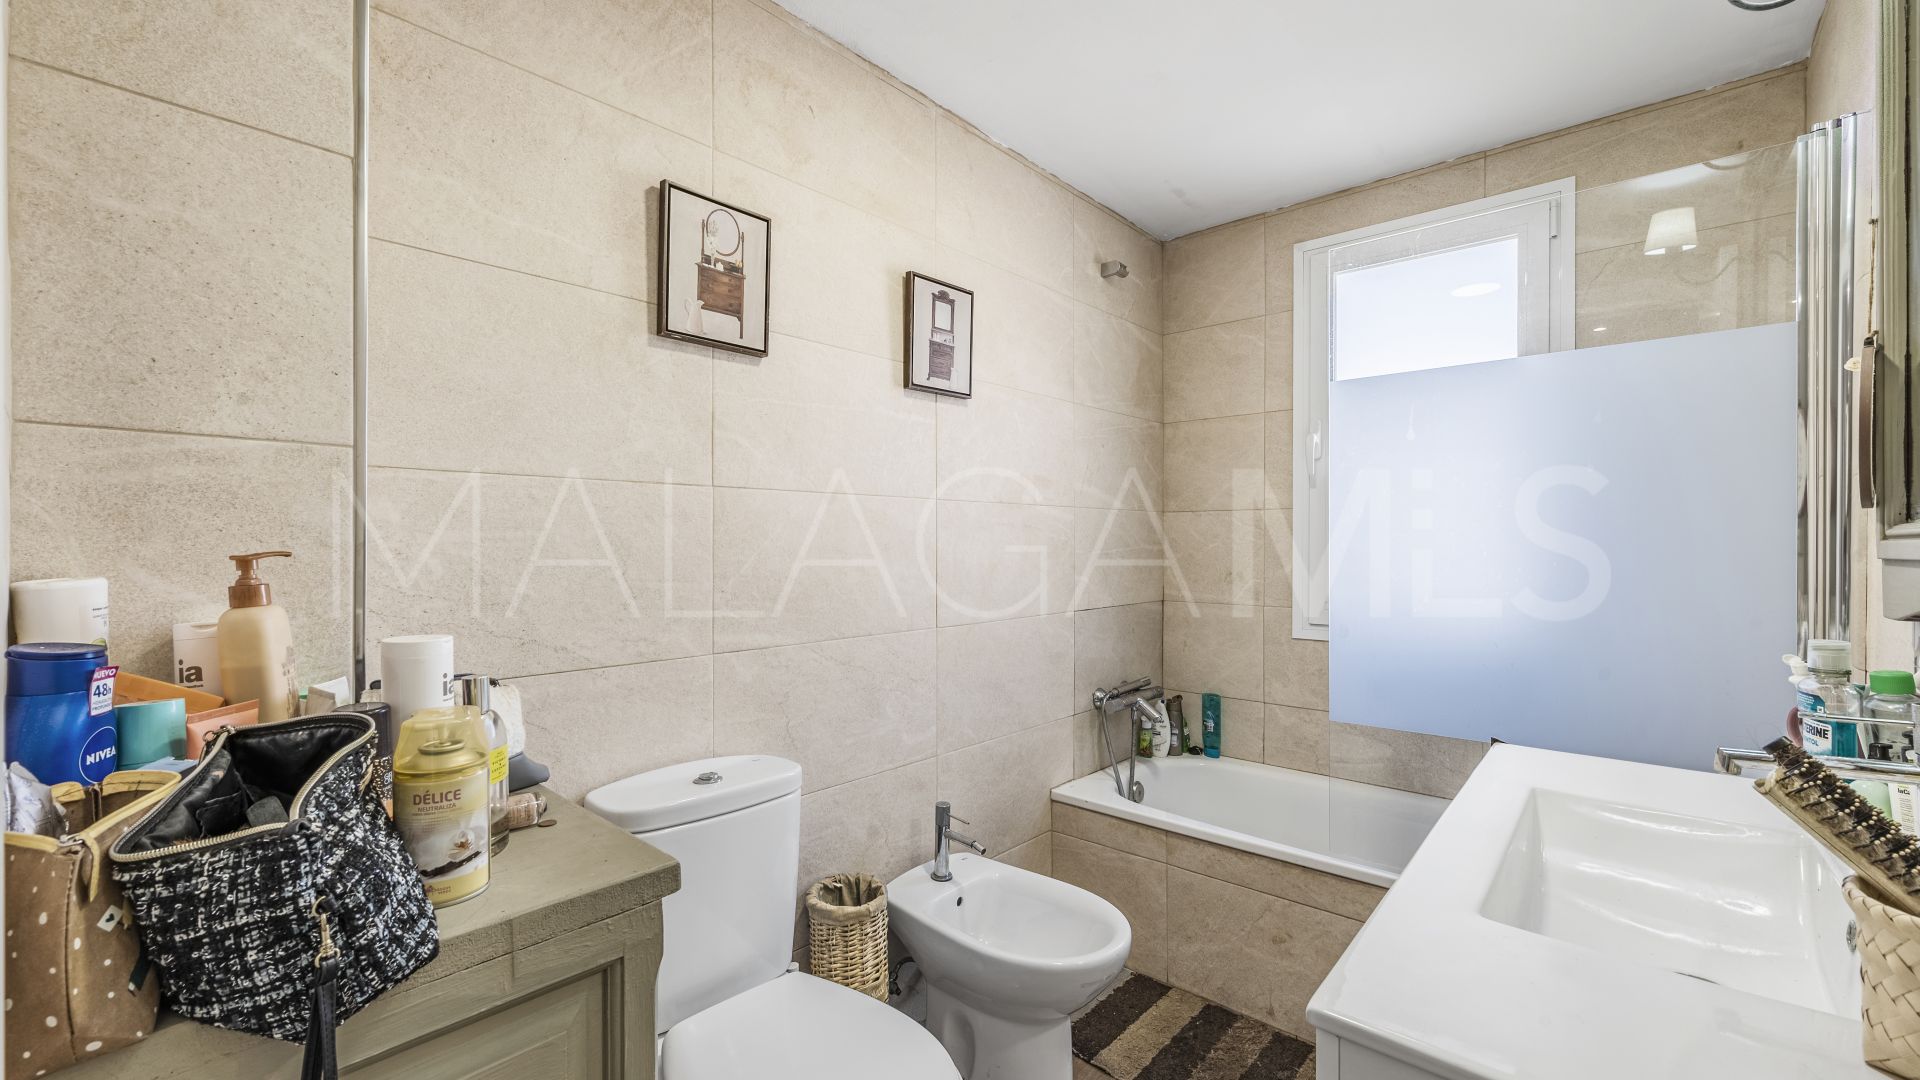 For sale Montemar 4 bedrooms apartment